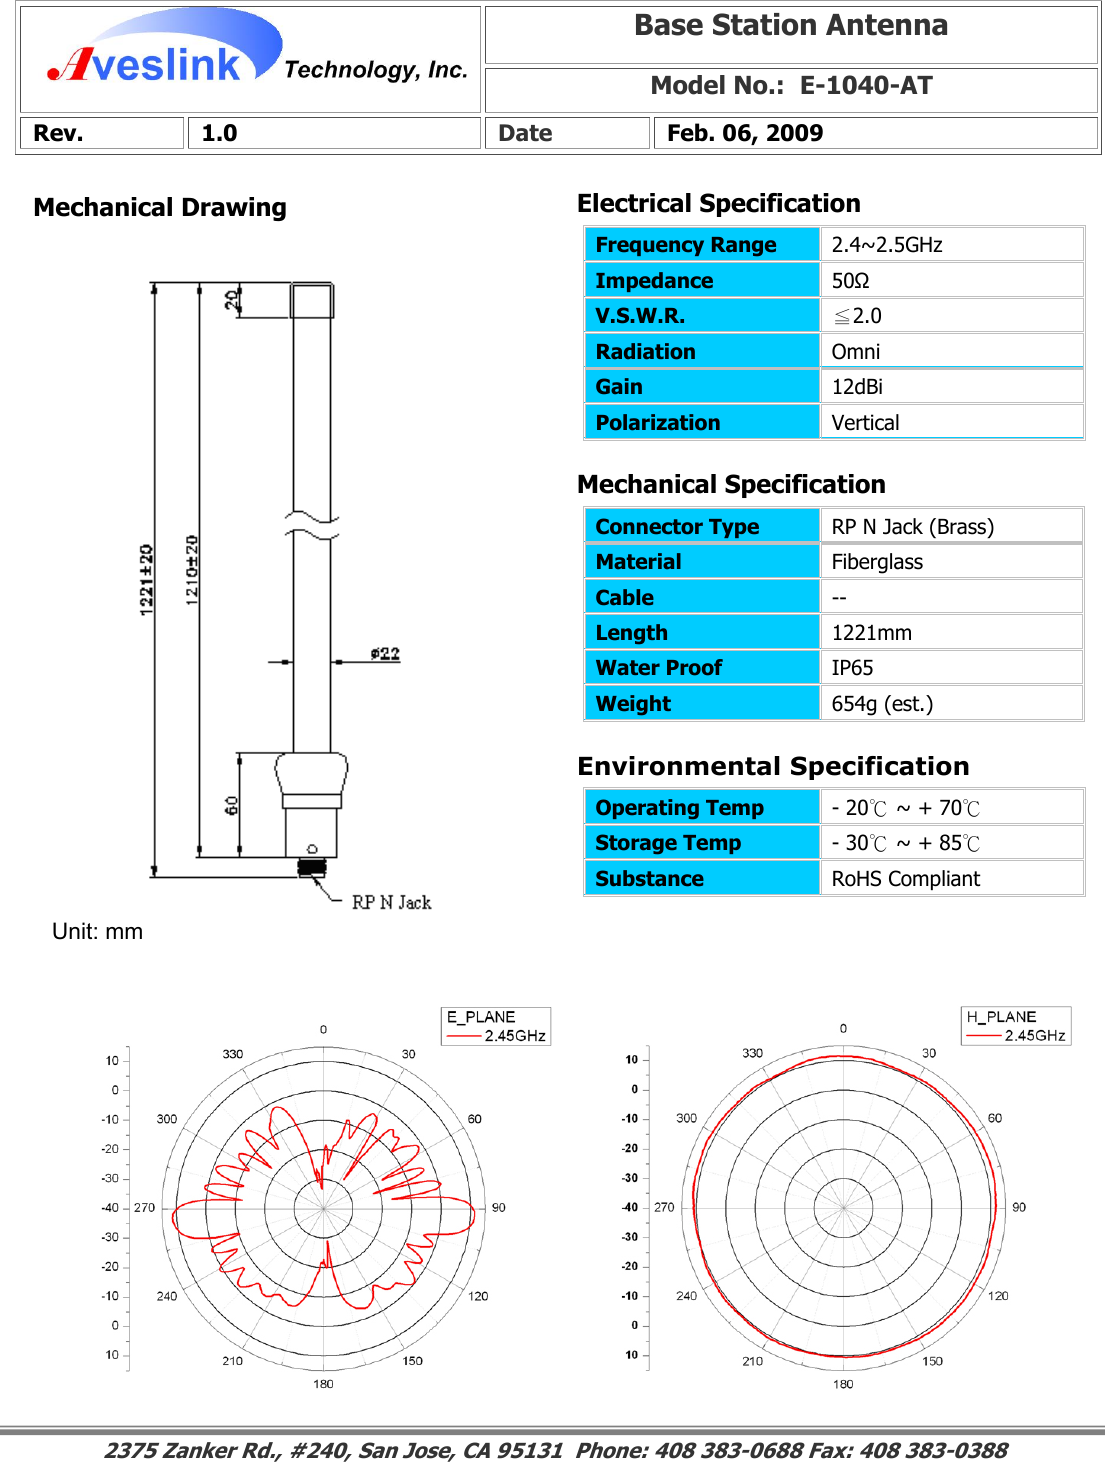 Mechanical DrawingMechanical Specification Environmental SpecificationBase Station Antenna Model No.:  E-1040-ATRev. 1.0  Date  Feb. 06, 2009 Connector Type   RP N Jack (Brass) Material  Fiberglass Cable  -- Length  1221mm Water Proof  IP65 Weight  654g (est.)                                                                                                                                                                                                                        2375 Zanker Rd., #240, San Jose, CA 95131  Phone: 408 383-0688 Fax: 408 383-0388 Operating Temp  - 20℃ ~ + 70℃  Storage Temp  - 30℃ ~ + 85℃  Substance  RoHS Compliant Electrical SpecificationFrequency Range   2.4~2.5GHz Impedance  50Ω V.S.W.R.  ≦2.0 Radiation  Omni Gain  12dBi Polarization  Vertical Unit: mm 